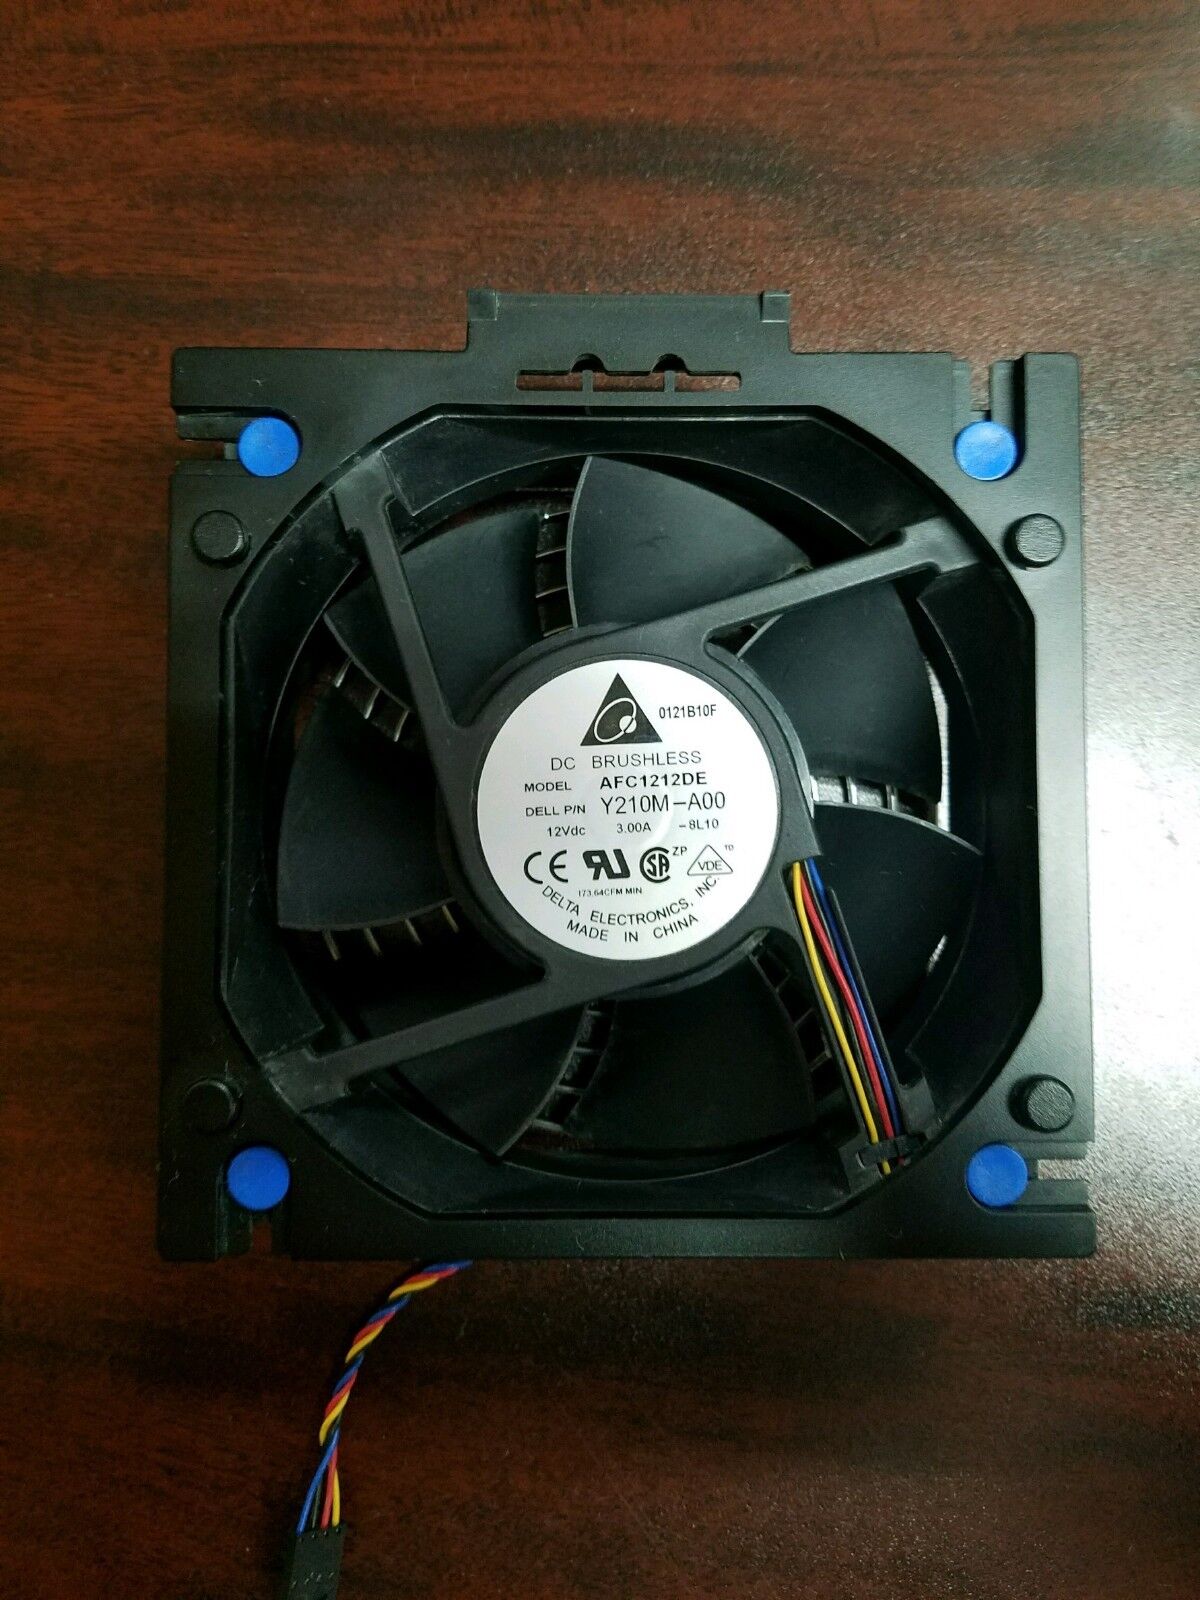 Dell PowerEdge T310 System Fan Assembly (Y210M-A00)